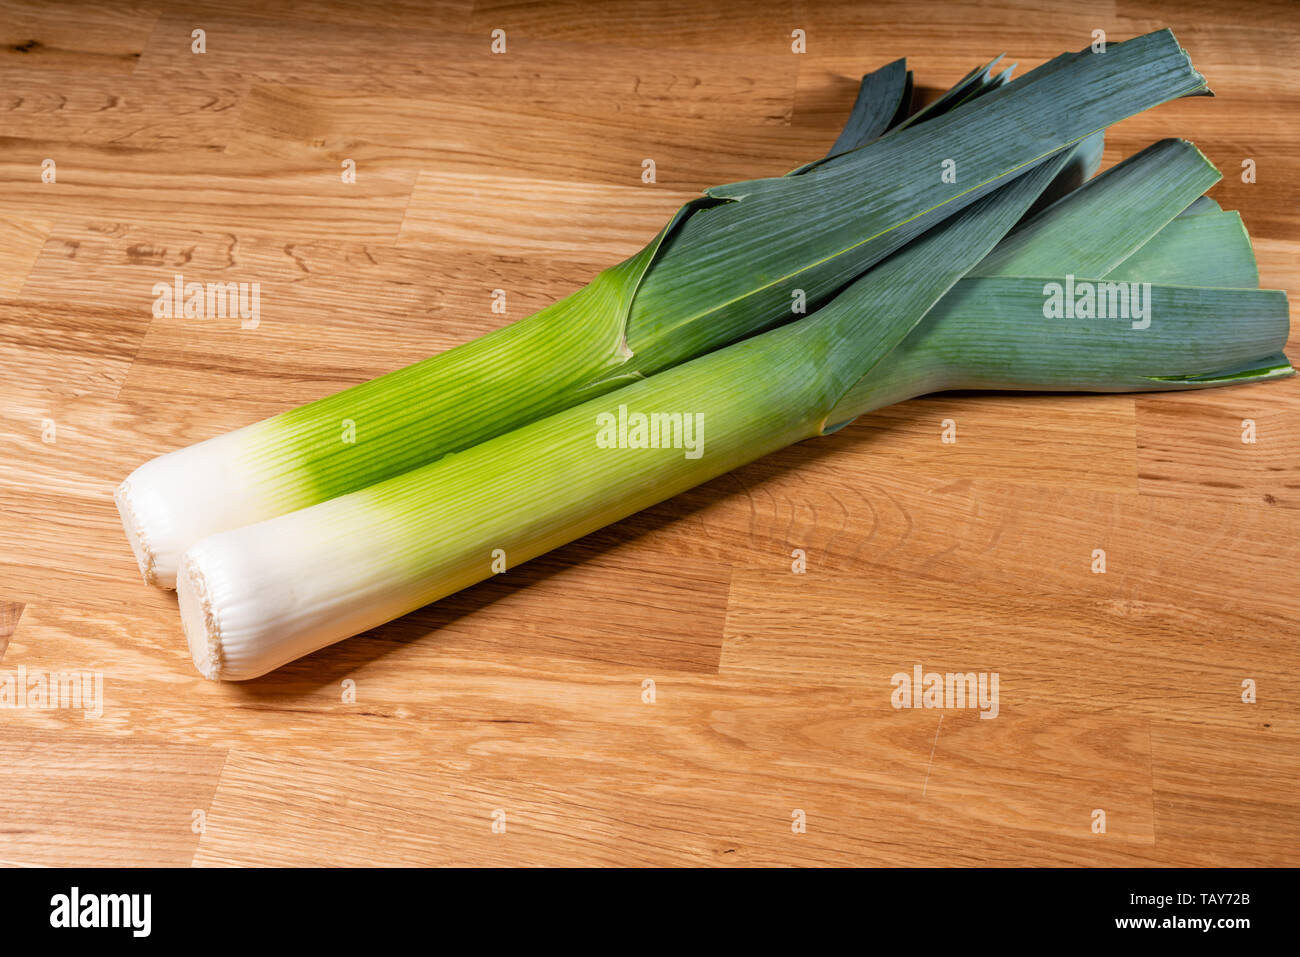 Freshly harvested leeks on a wooden table Stock Photo